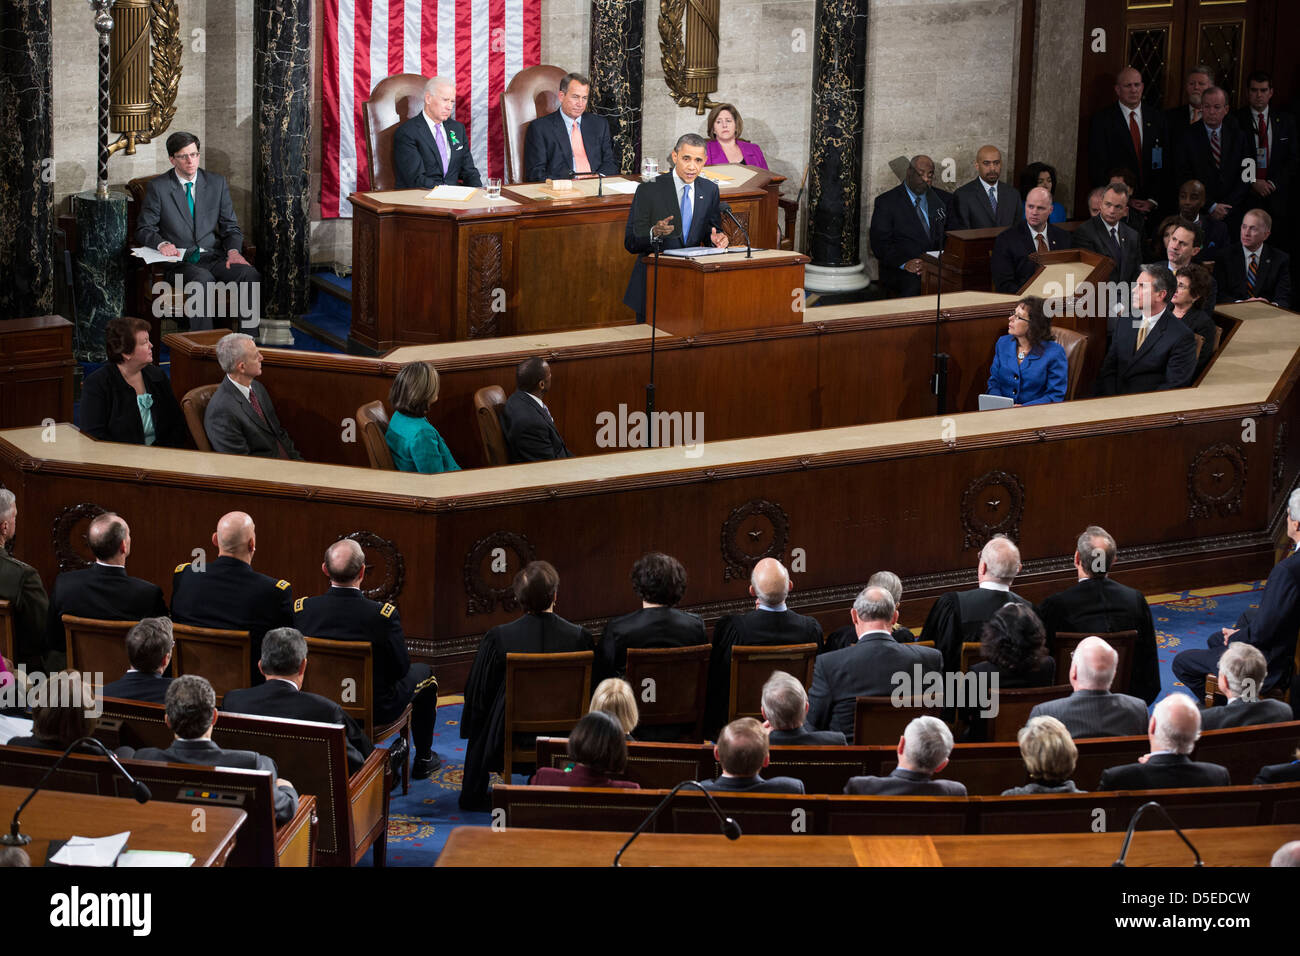 U.S. President Barack Obama delivers the State of the Union address to a joint session of Congress at the Capitol in Washington. Stock Photo